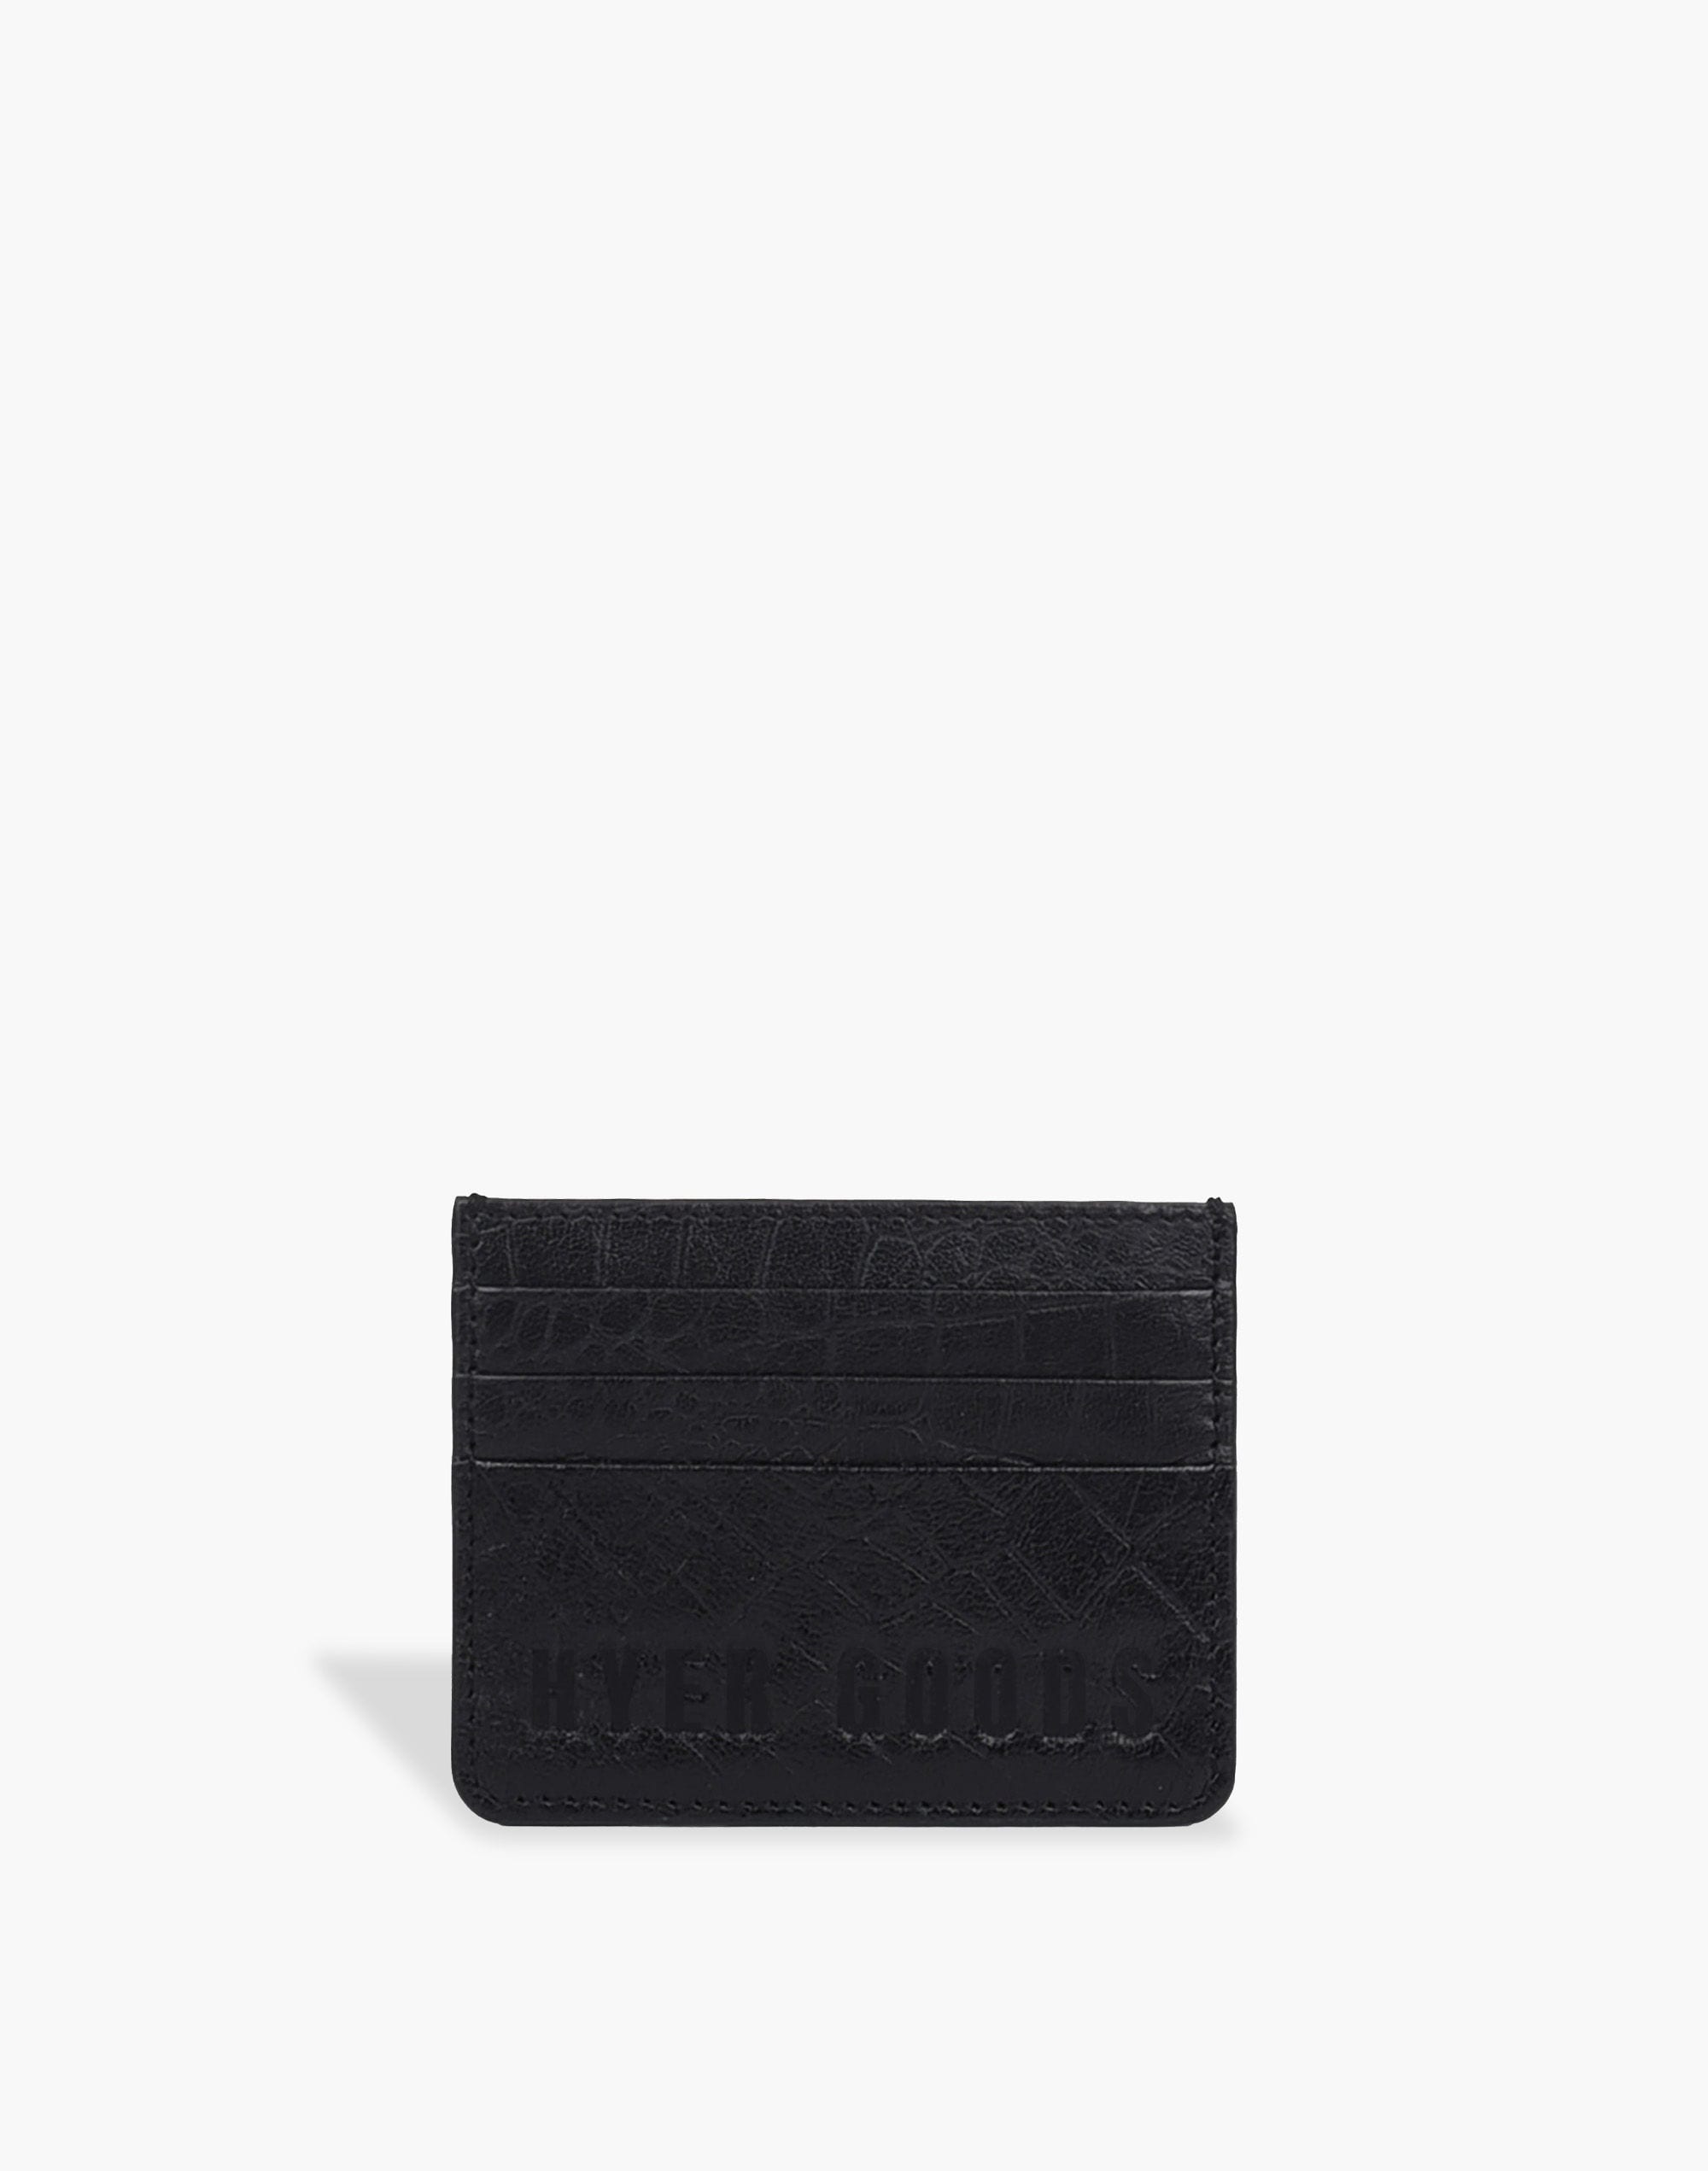 Hyer Goods Luxe Card Wallet